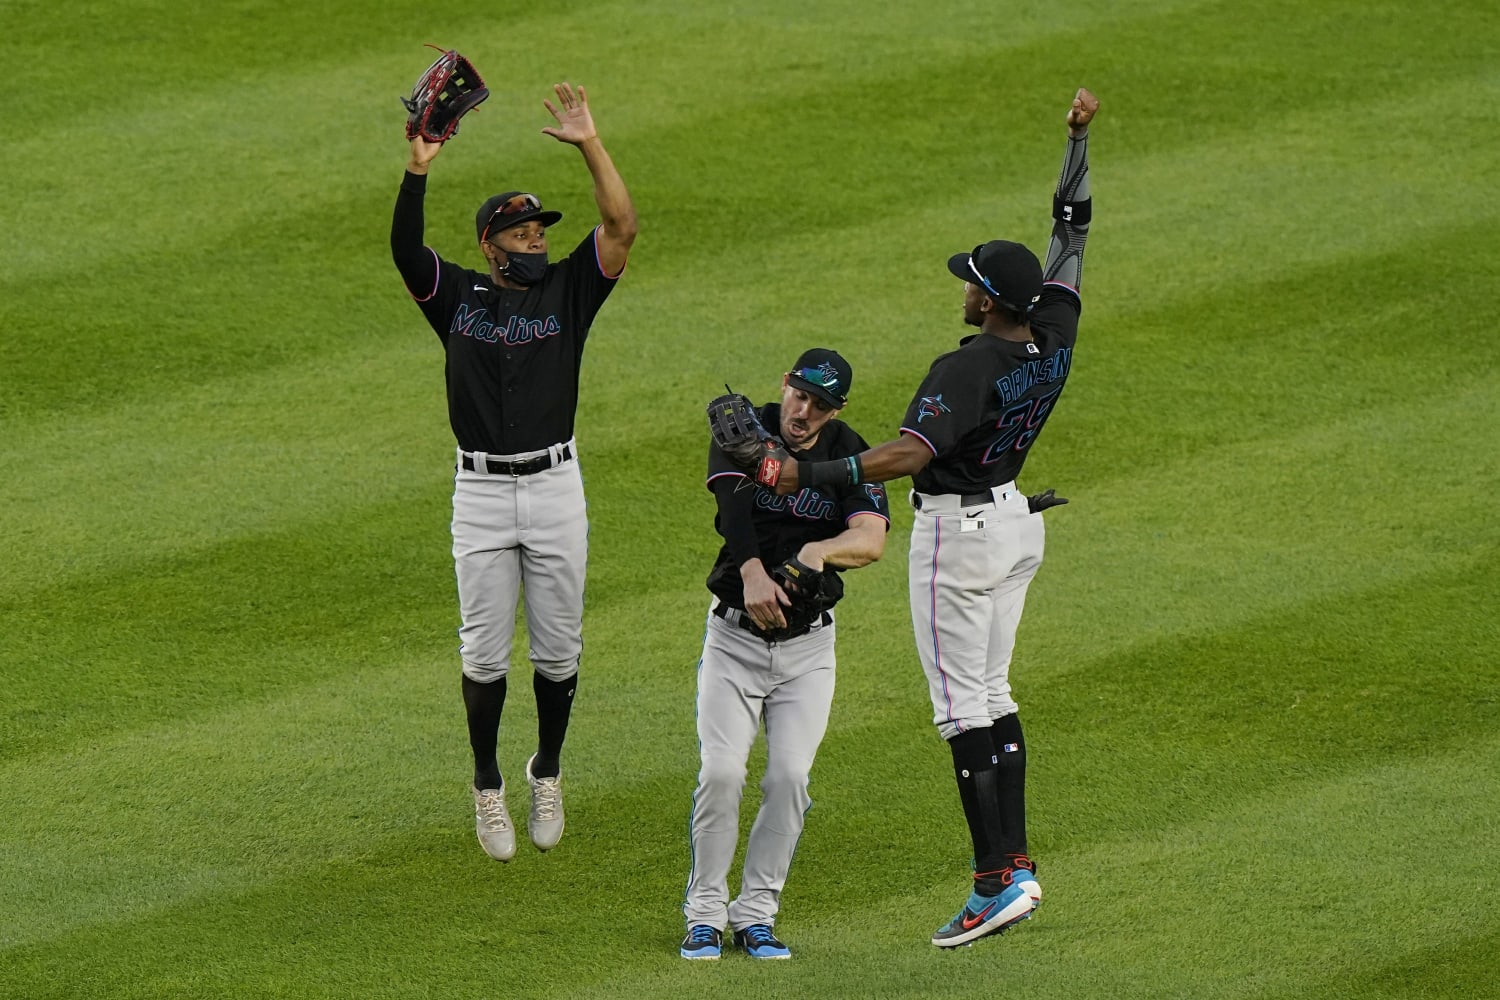 For Marlins, playoff berth could be start of a new era